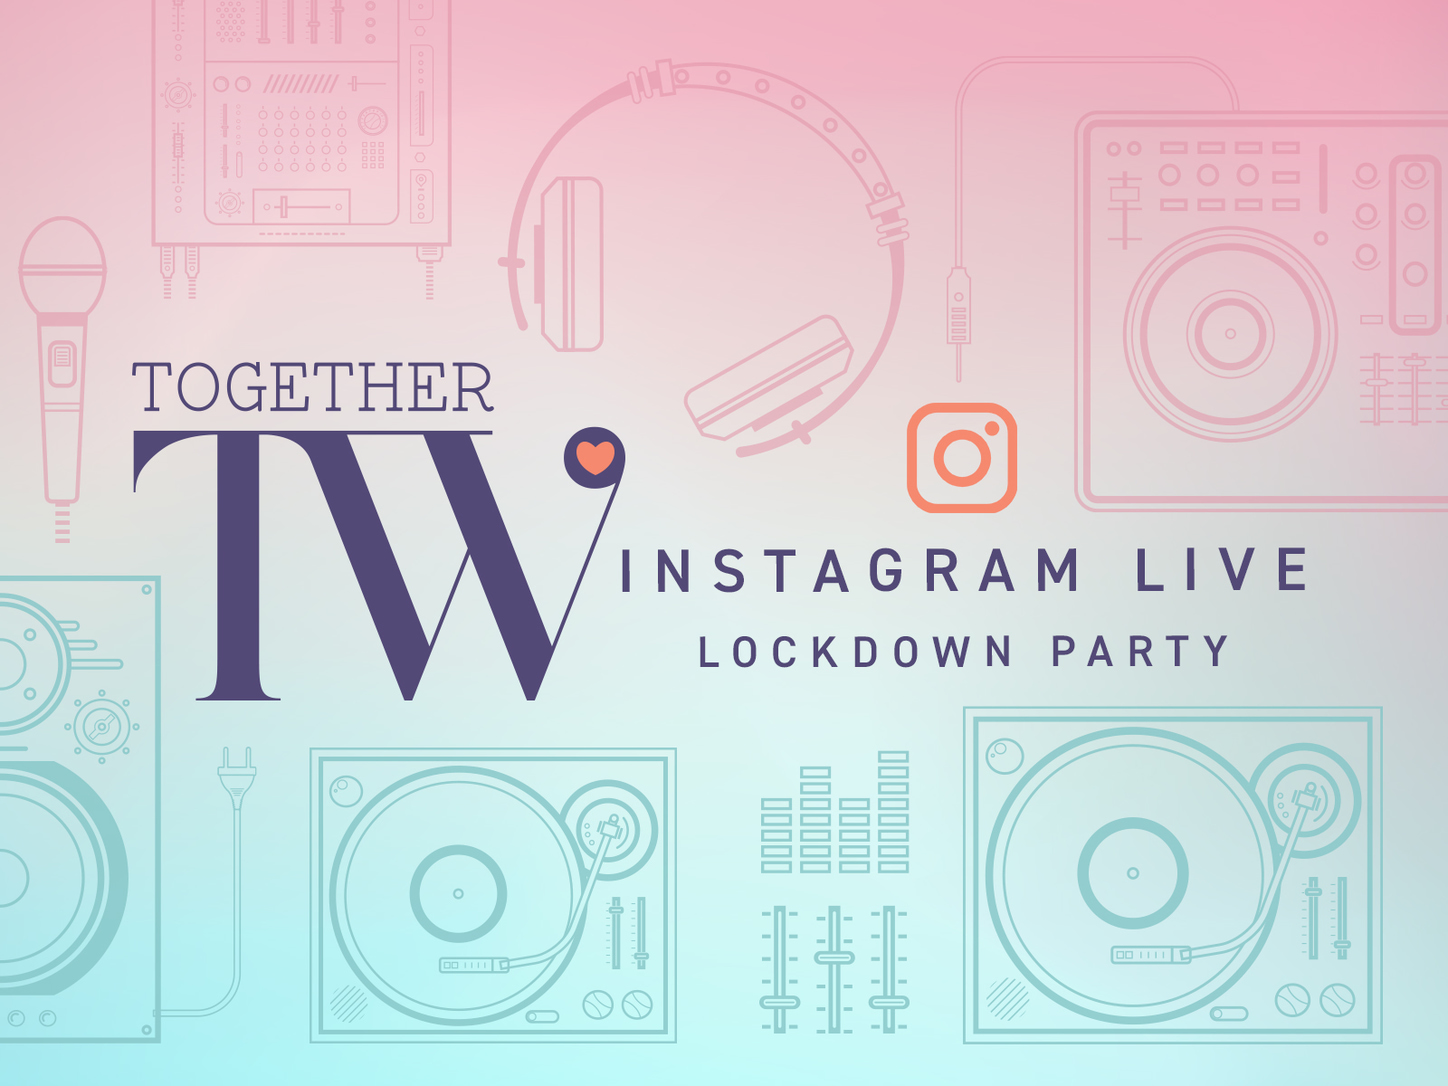 TW Together Live Lockdown Party